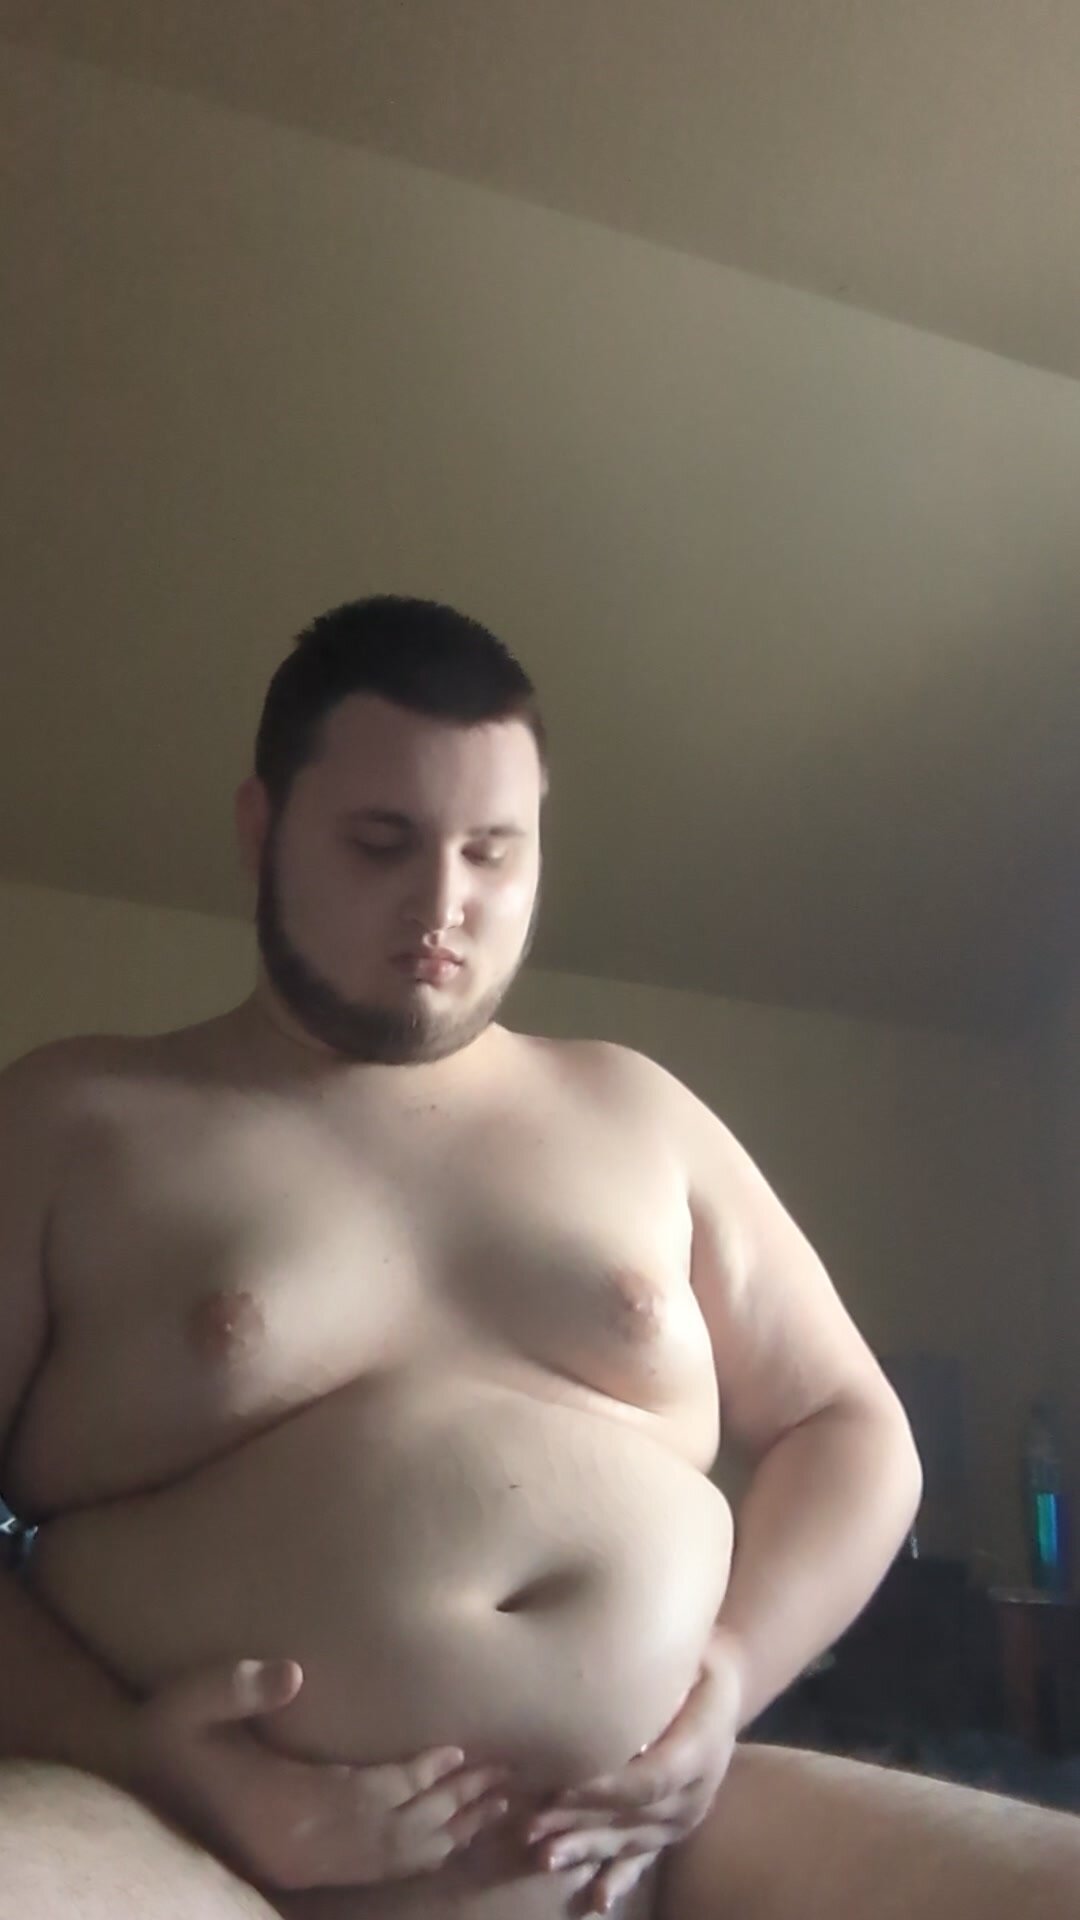 Just shaved my belly and moobs